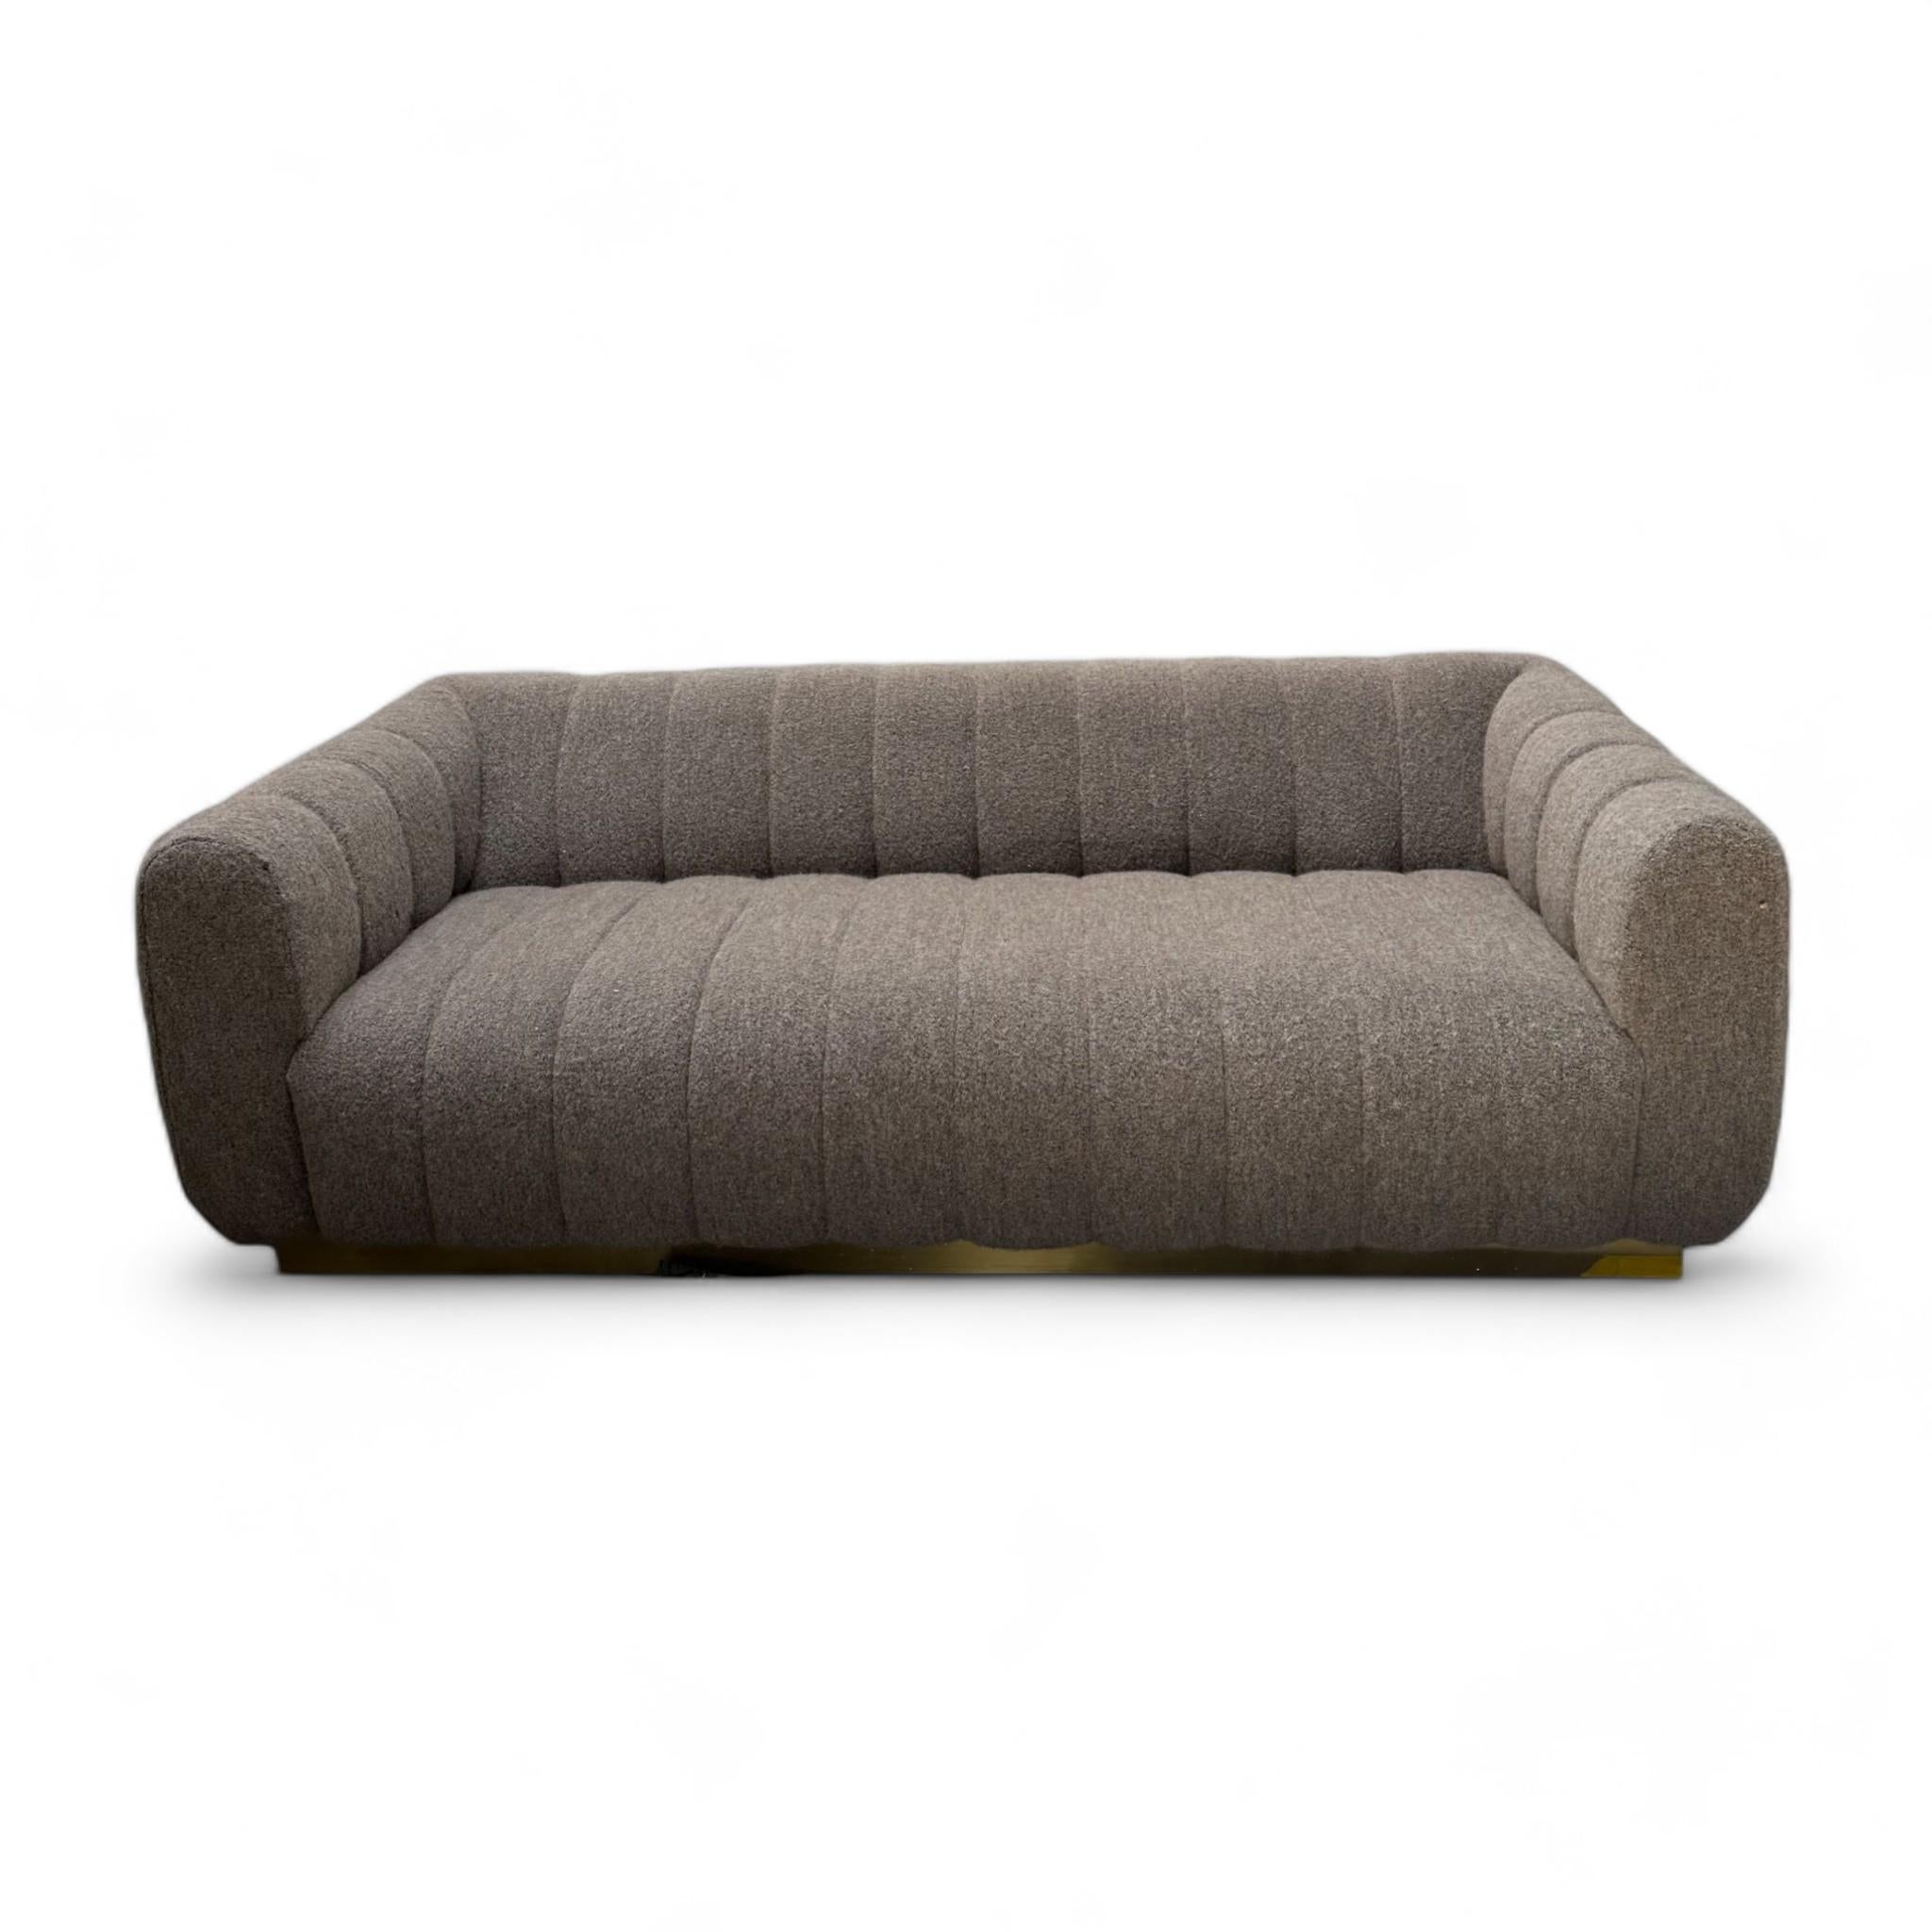 Jean De Merry Leith Wool Boucle Sofa with Brass Base

Description
Wood Frame
Brass Base
100% wool boucle

Dimensions
W92.5″ x D42.5″ x H29″
Seat Depth 27.5″
Seat Height 18″

Jean de Merry was established in 2001. A marriage of quality craftsmanship